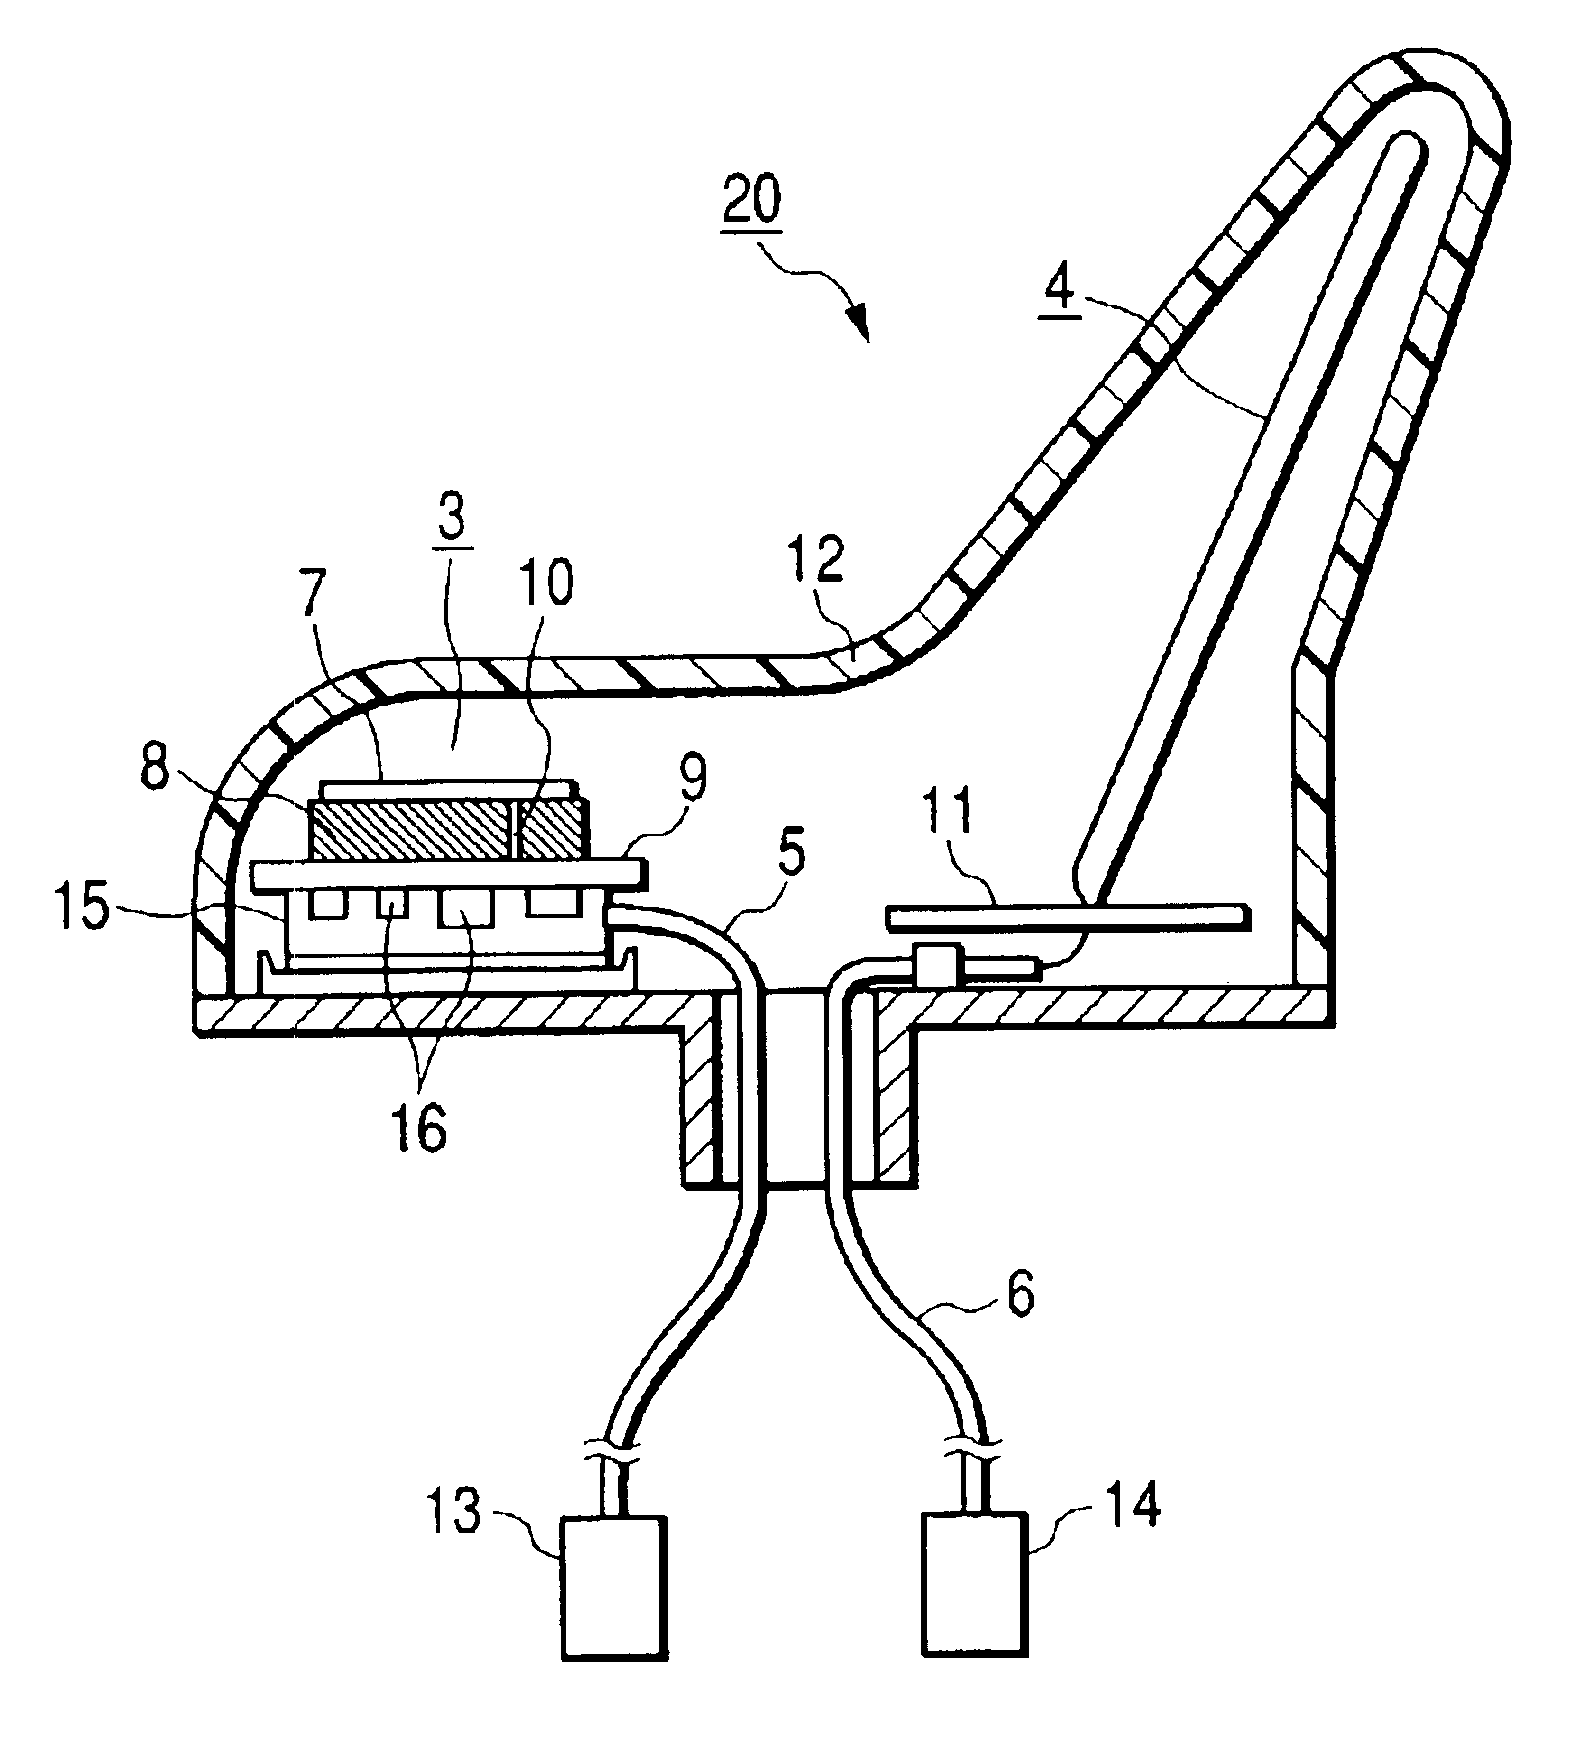 Dual antenna capable of transmitting and receiving circularly polarized electromagnetic wave and linearly polarized electromagnetic wave